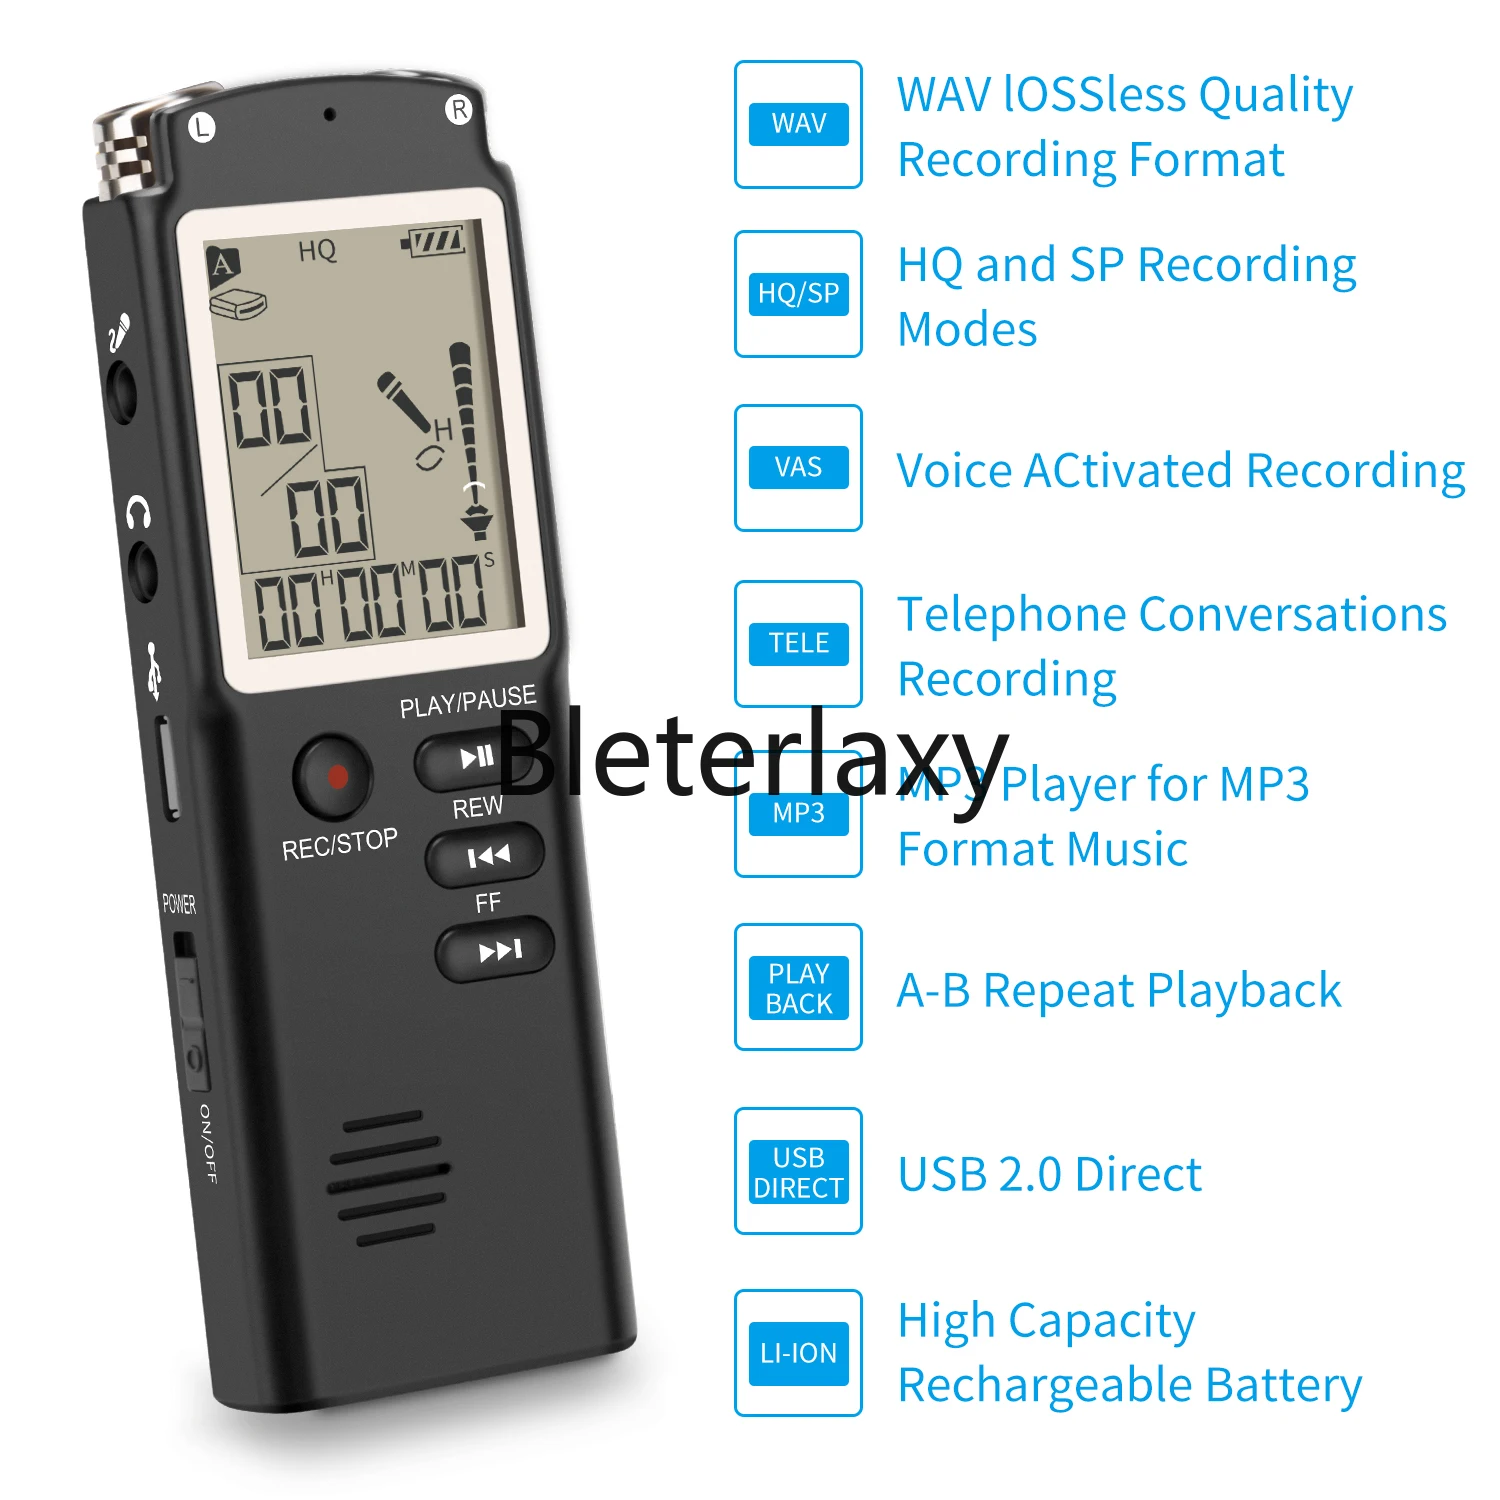 32GB/16GB/8GB High-Quality Digital Audio Voice Recorder a key lock screen Telephone Recording Real Time Display with MP3 Player